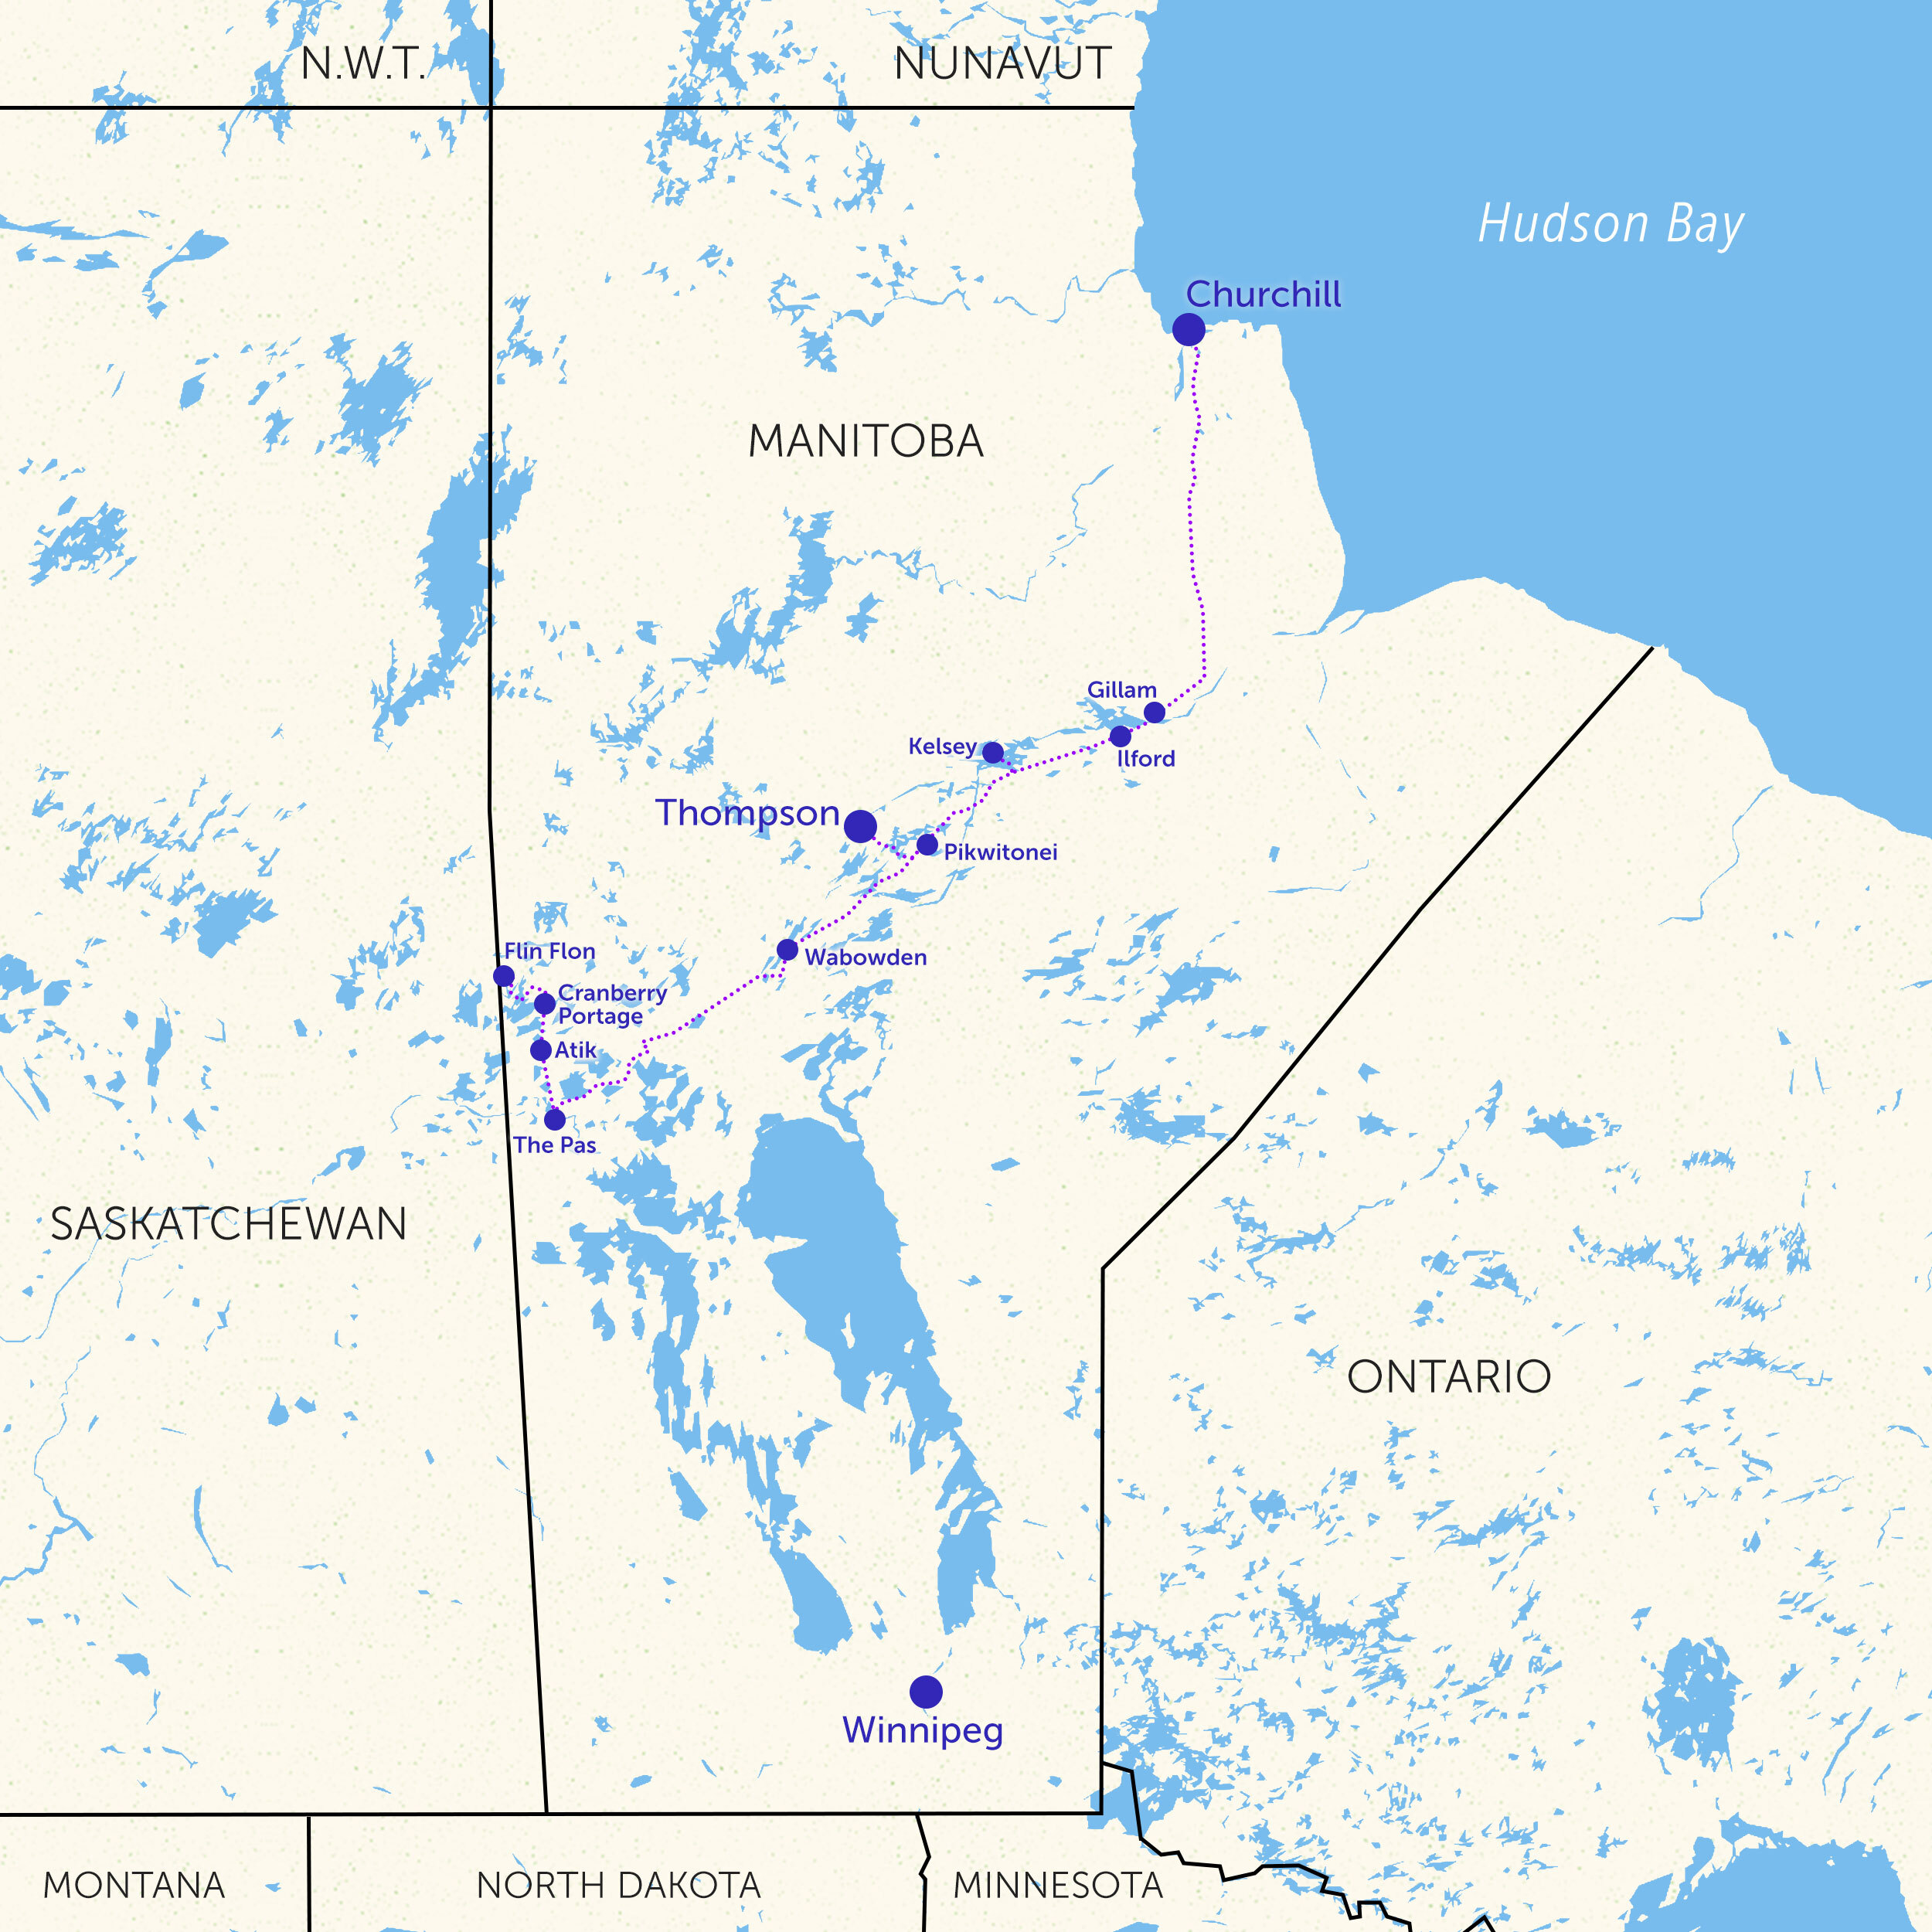 Illustrated map depicting the Hudson Bay Railway in northern Manitoba, ending at the town of Churchill